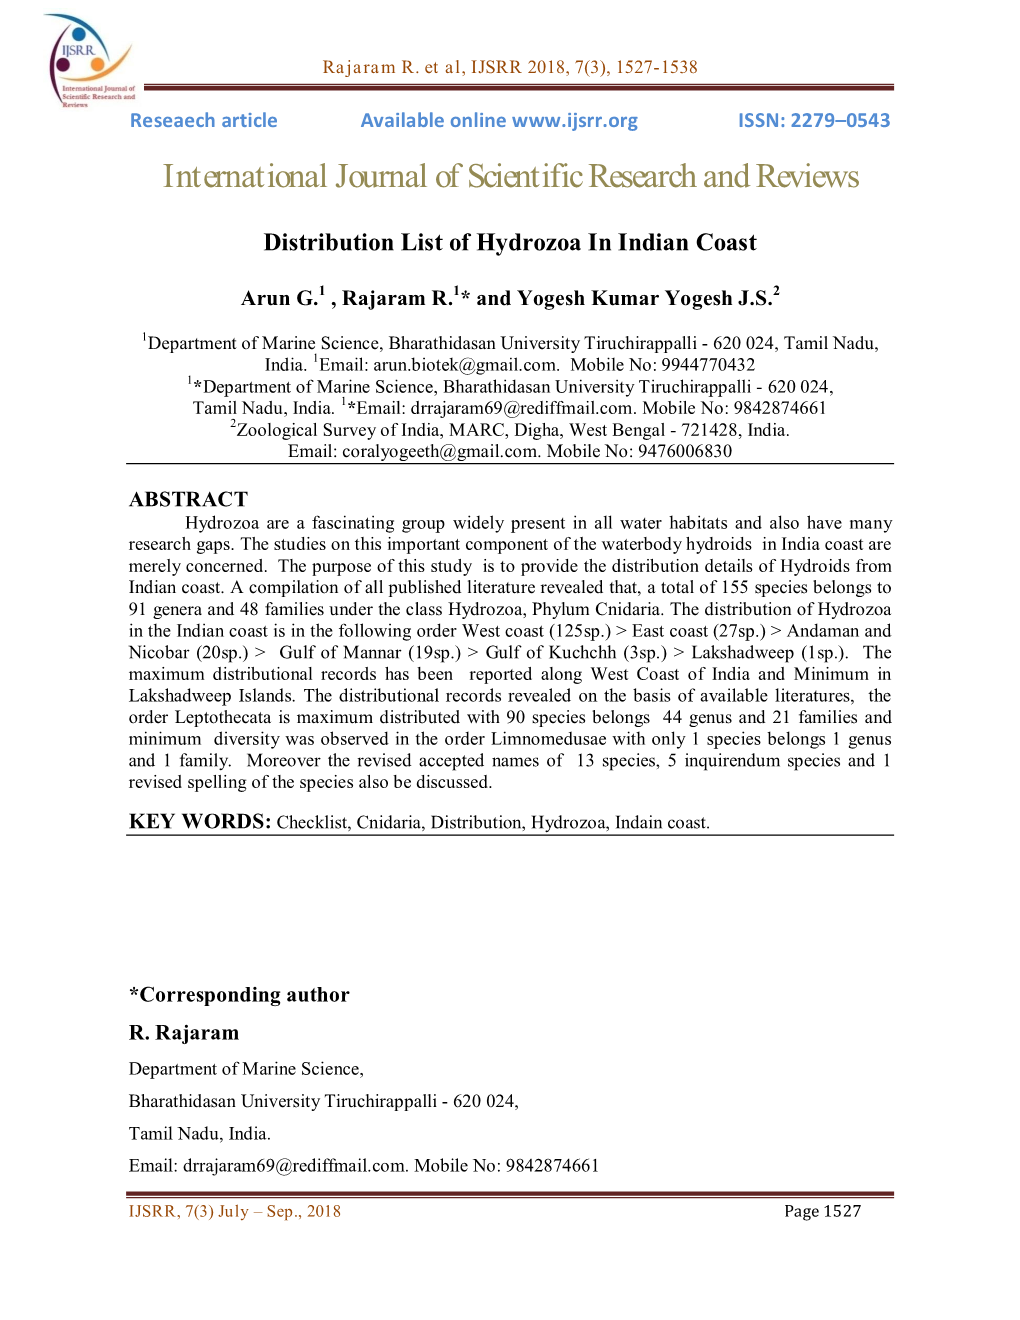 International Journal of Scientific Research and Reviews Distribution List of Hydrozoa in Indian Coast